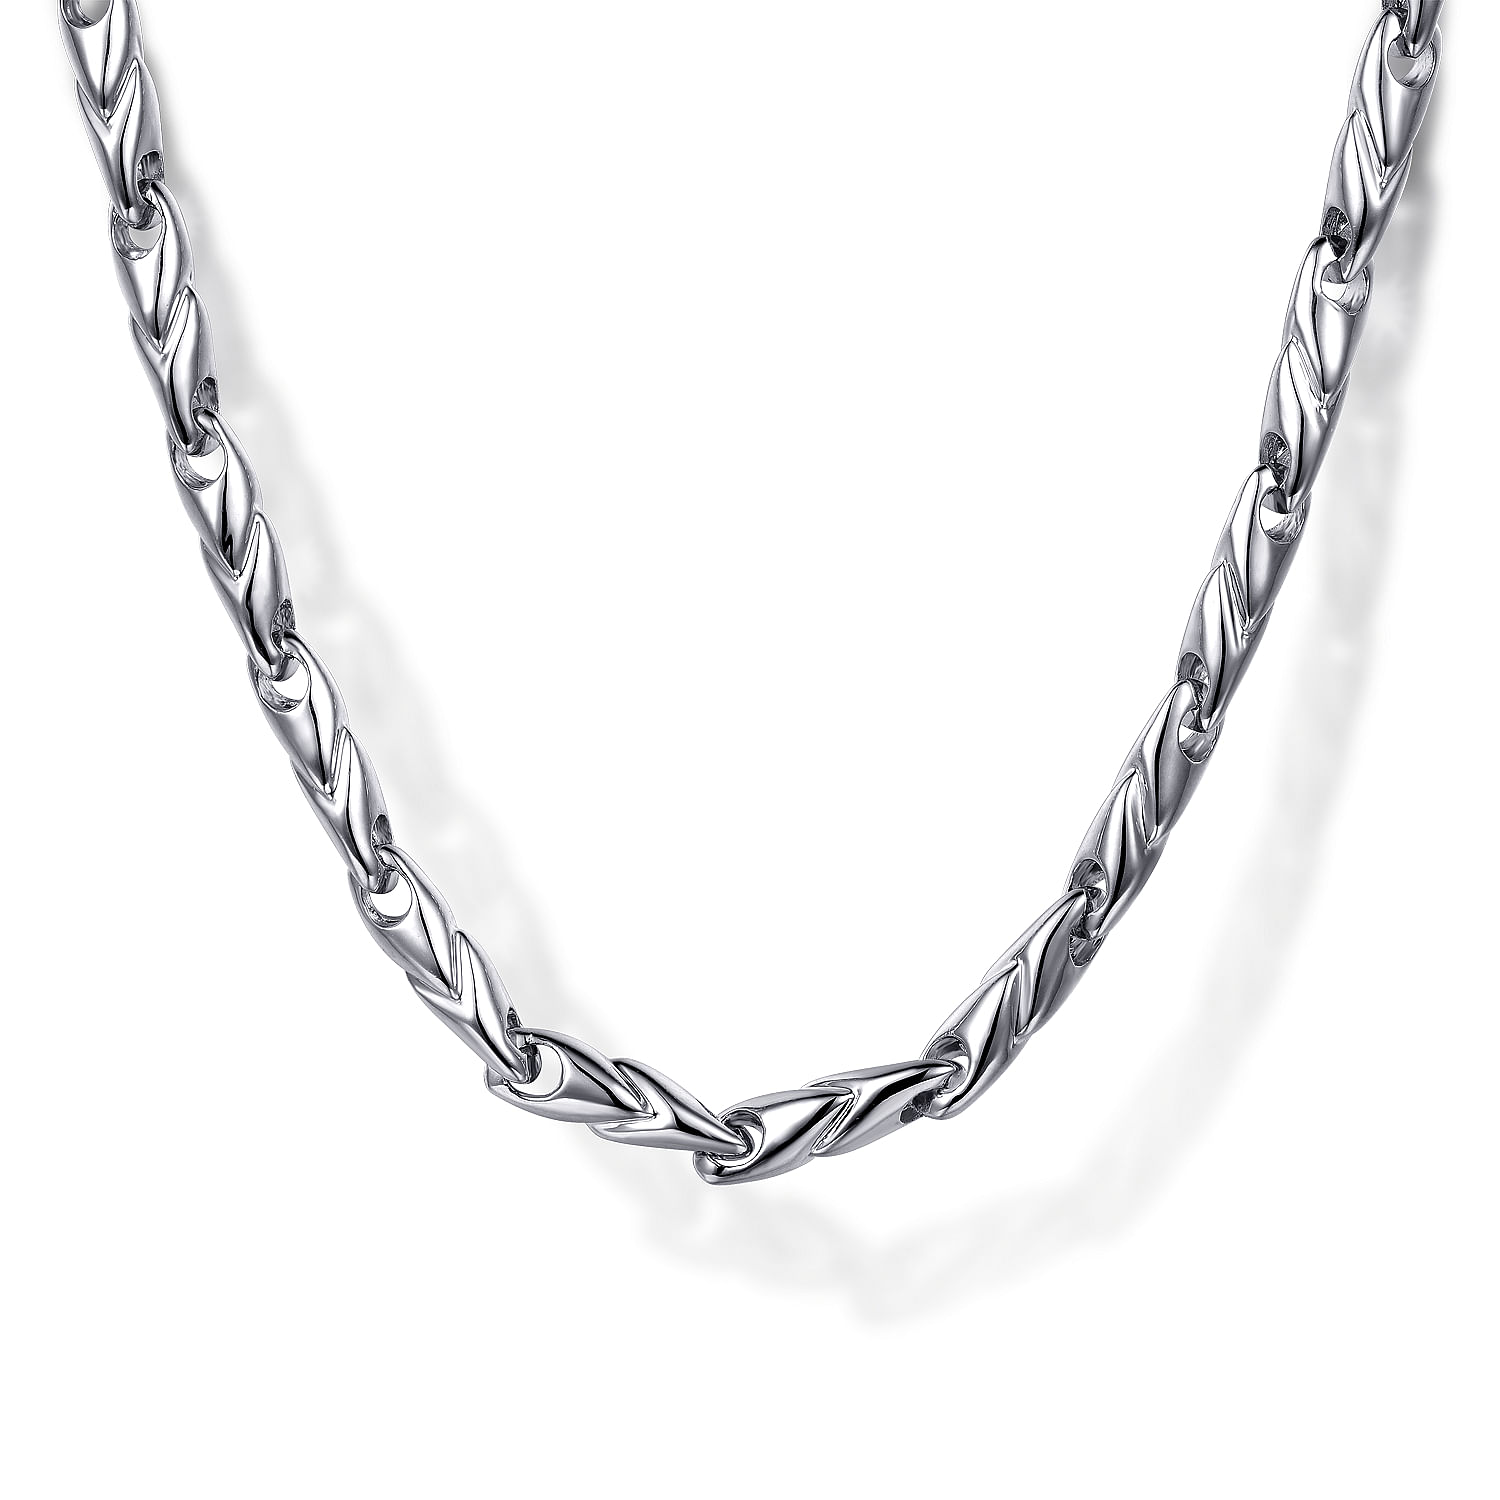 22 Inch 925 Sterling Silver Men's Chain Necklace